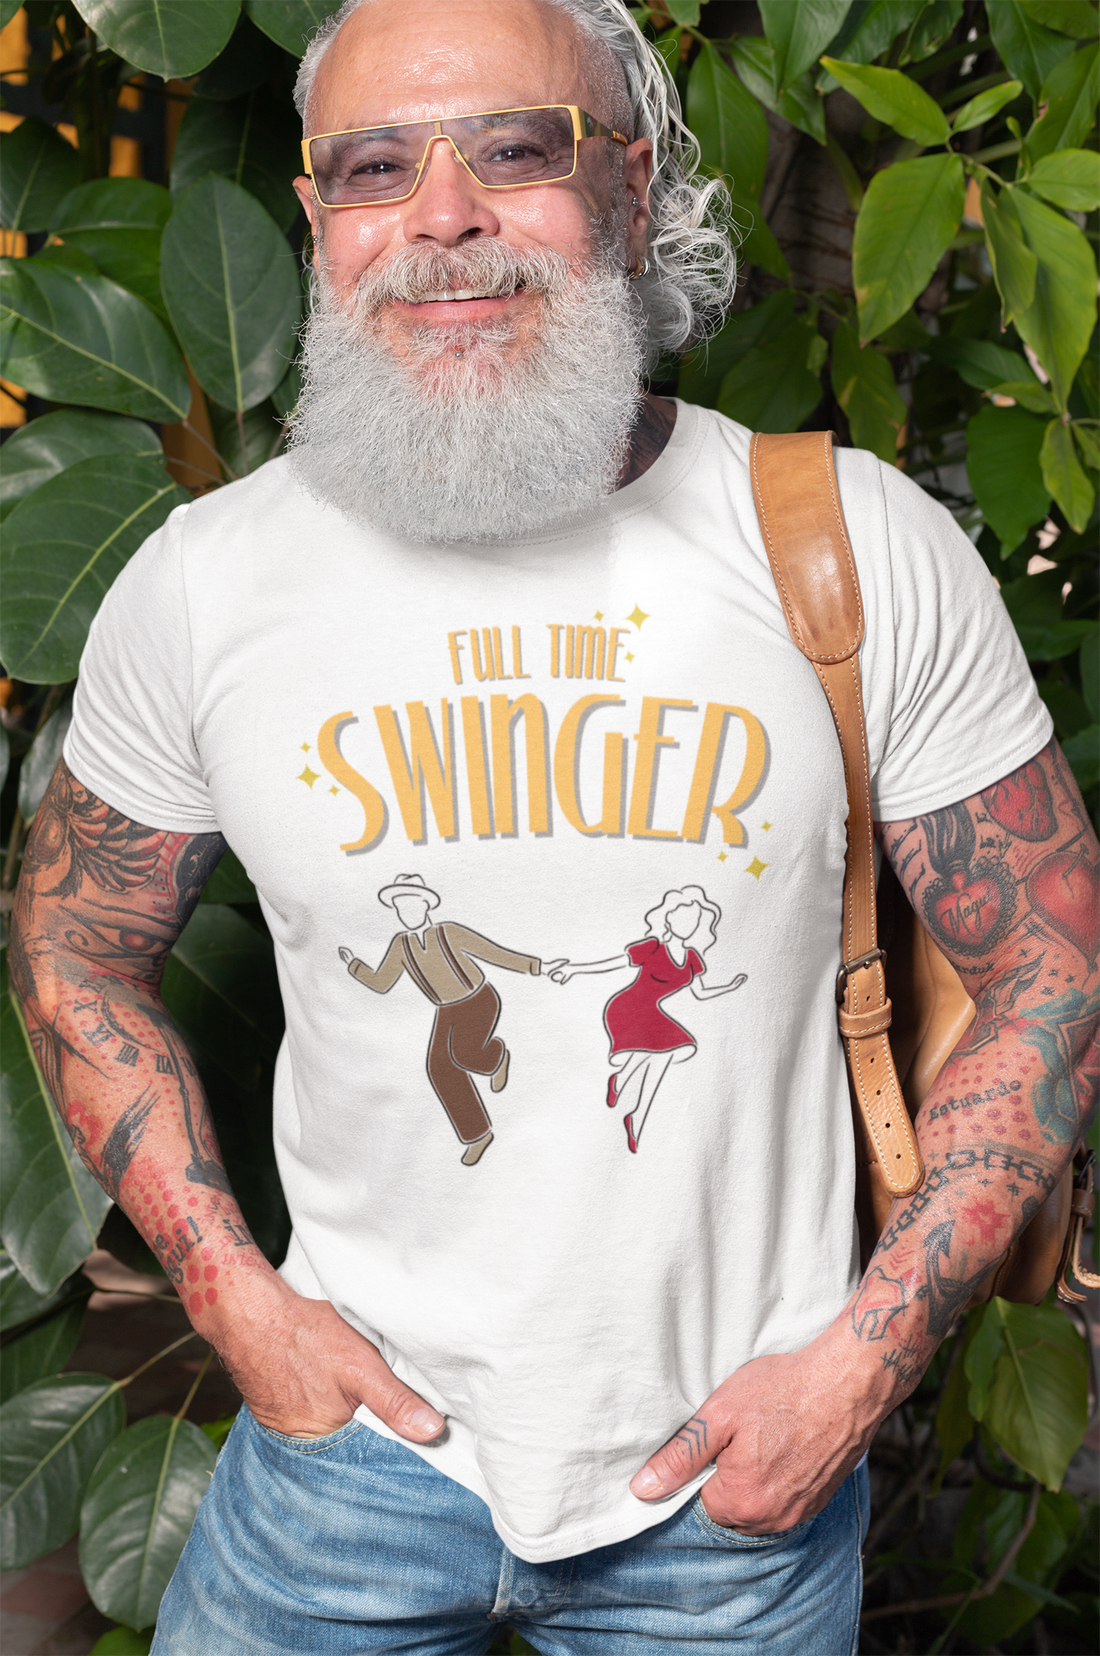 A white dance tshirt design with the text "Full time swinger" and a couple dancing. A great swing dance tshirt for those dancing Lindy hop and West Coast Swing